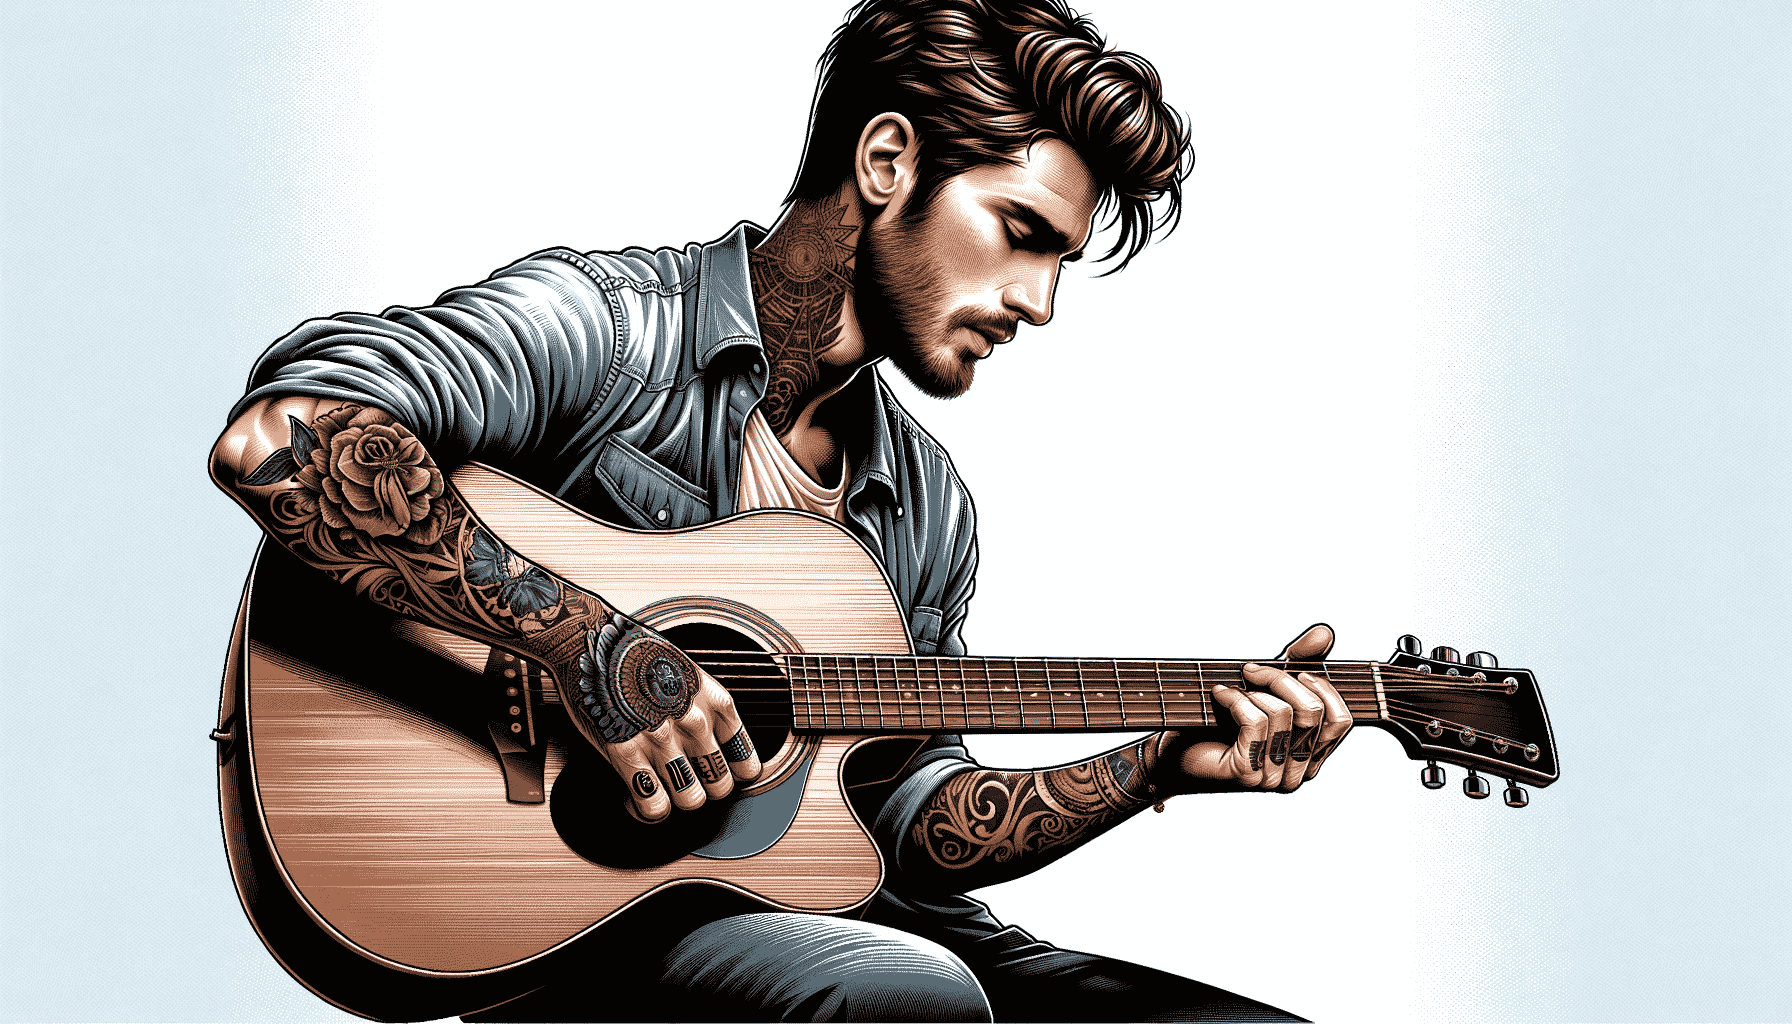 man with tattoo playing guitar